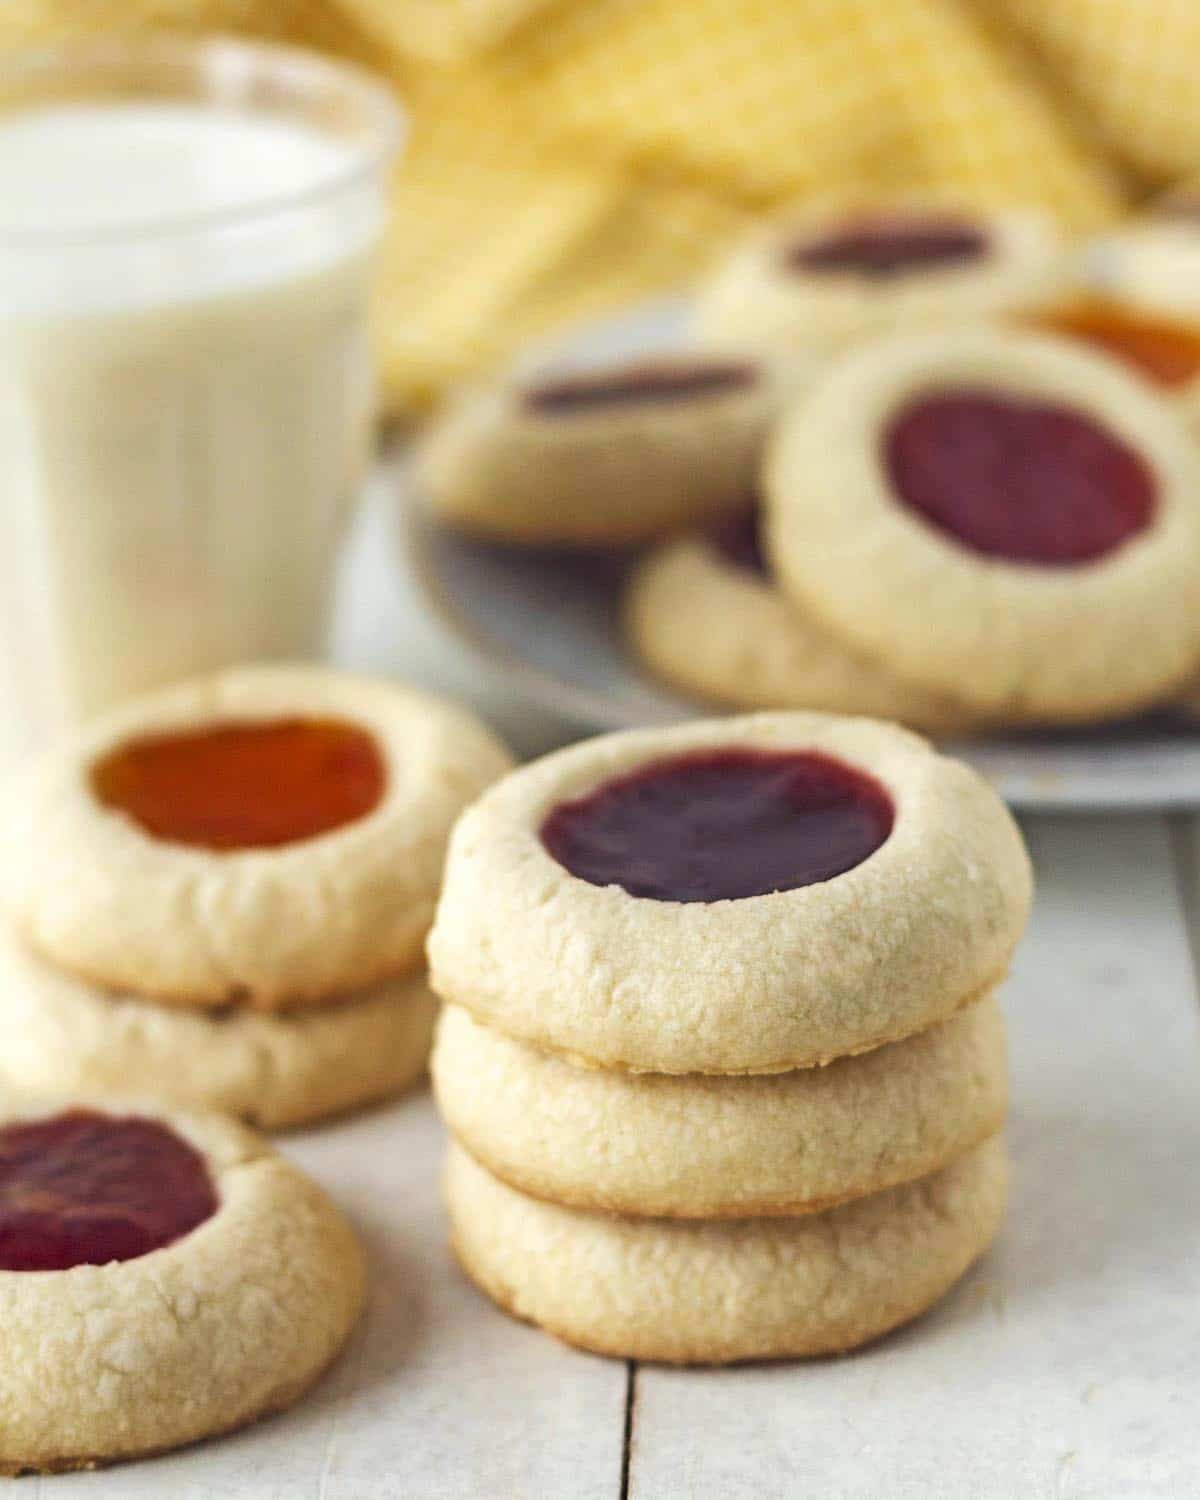 Three vegan gluten-free thumbprint cookies stacked on each other, more cookies sit on a plate behind and beside the stack.